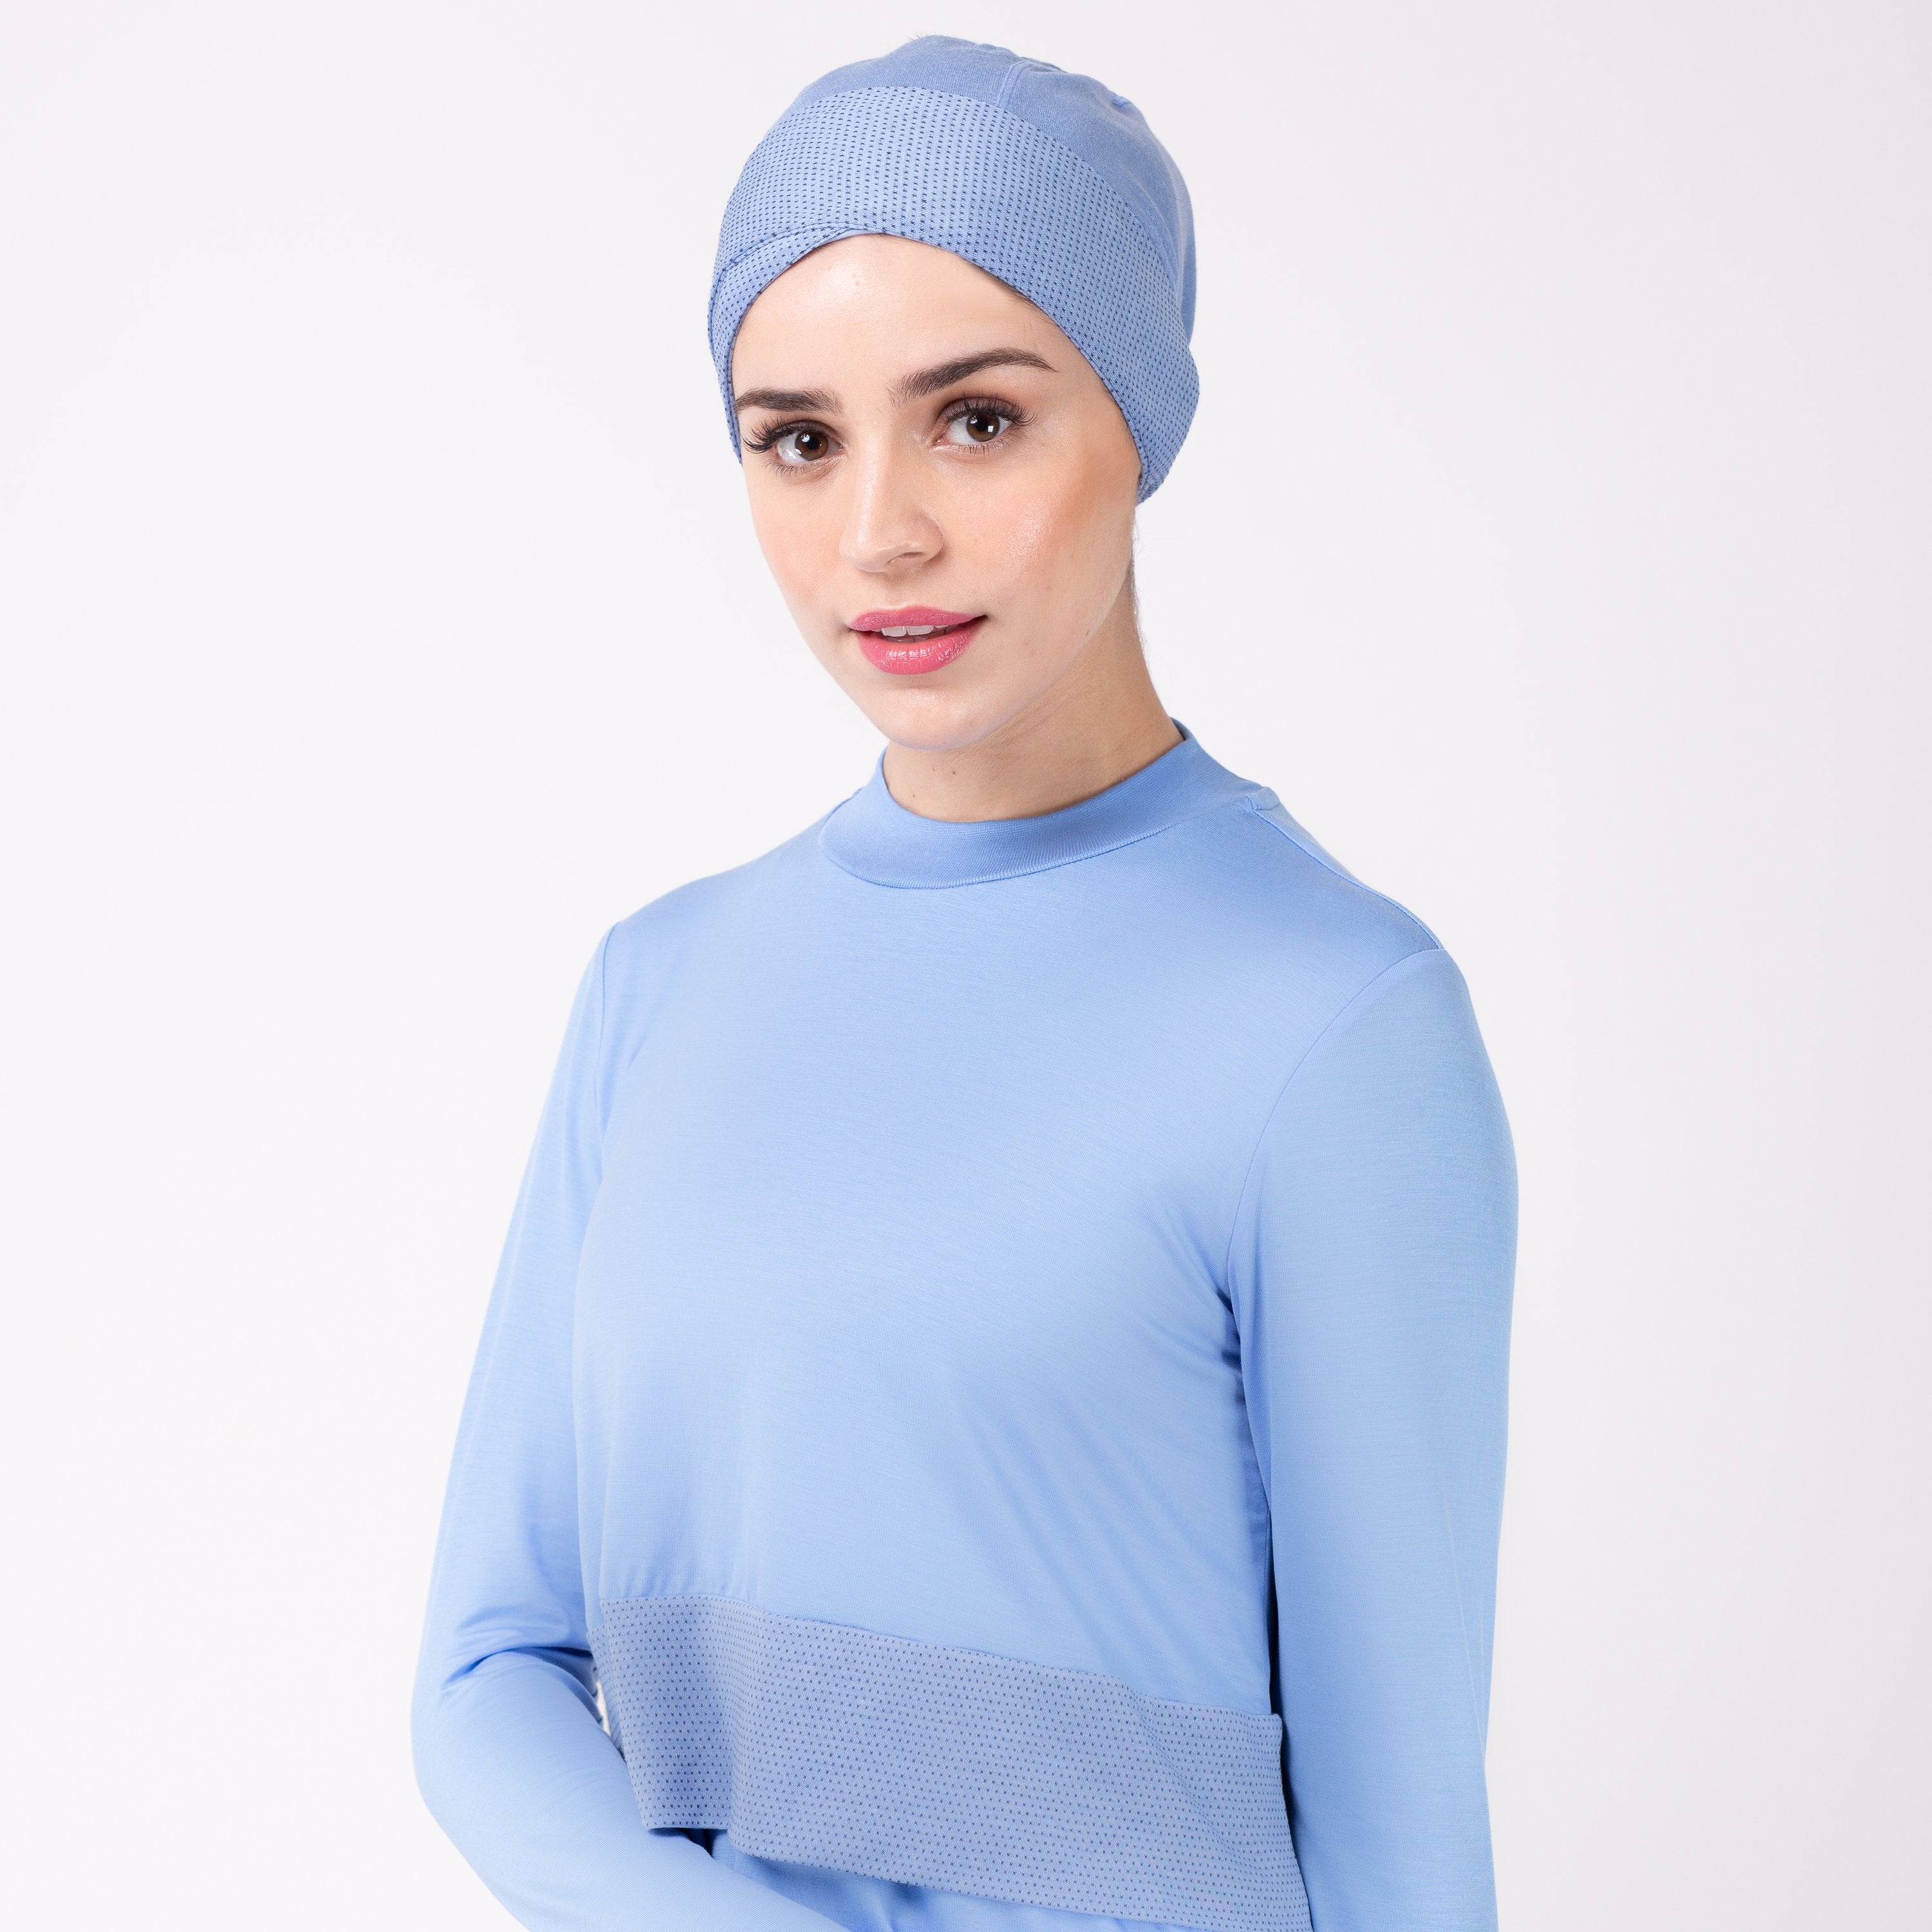 Woman facing left in sky blue shirt and matching sky blue HAWA headwrap.